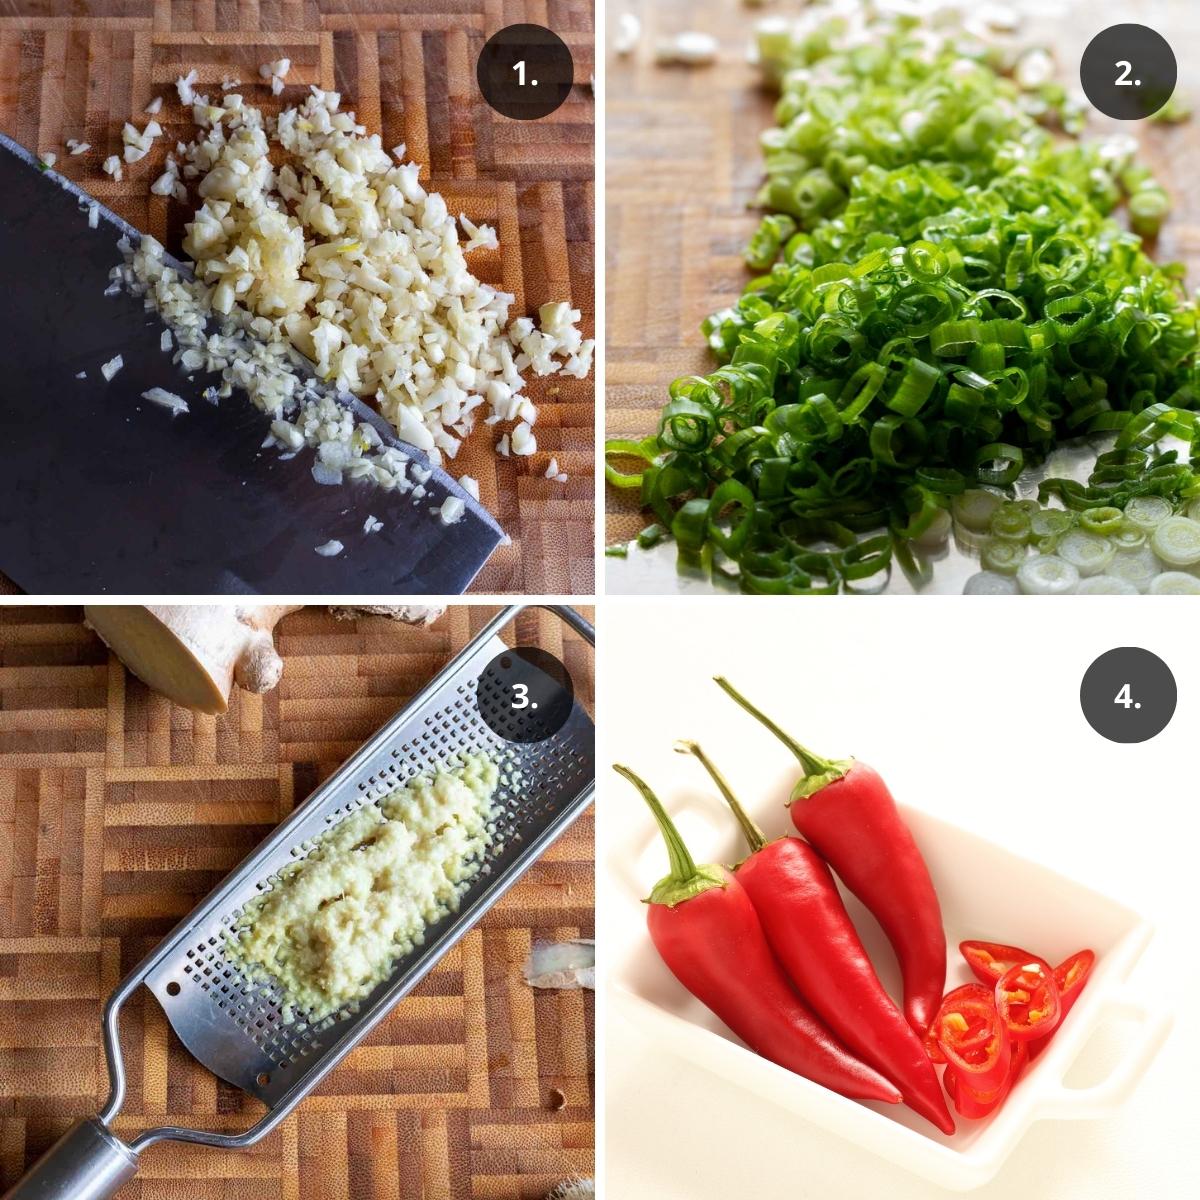 Garlic topping and garnishes chopped or grated.